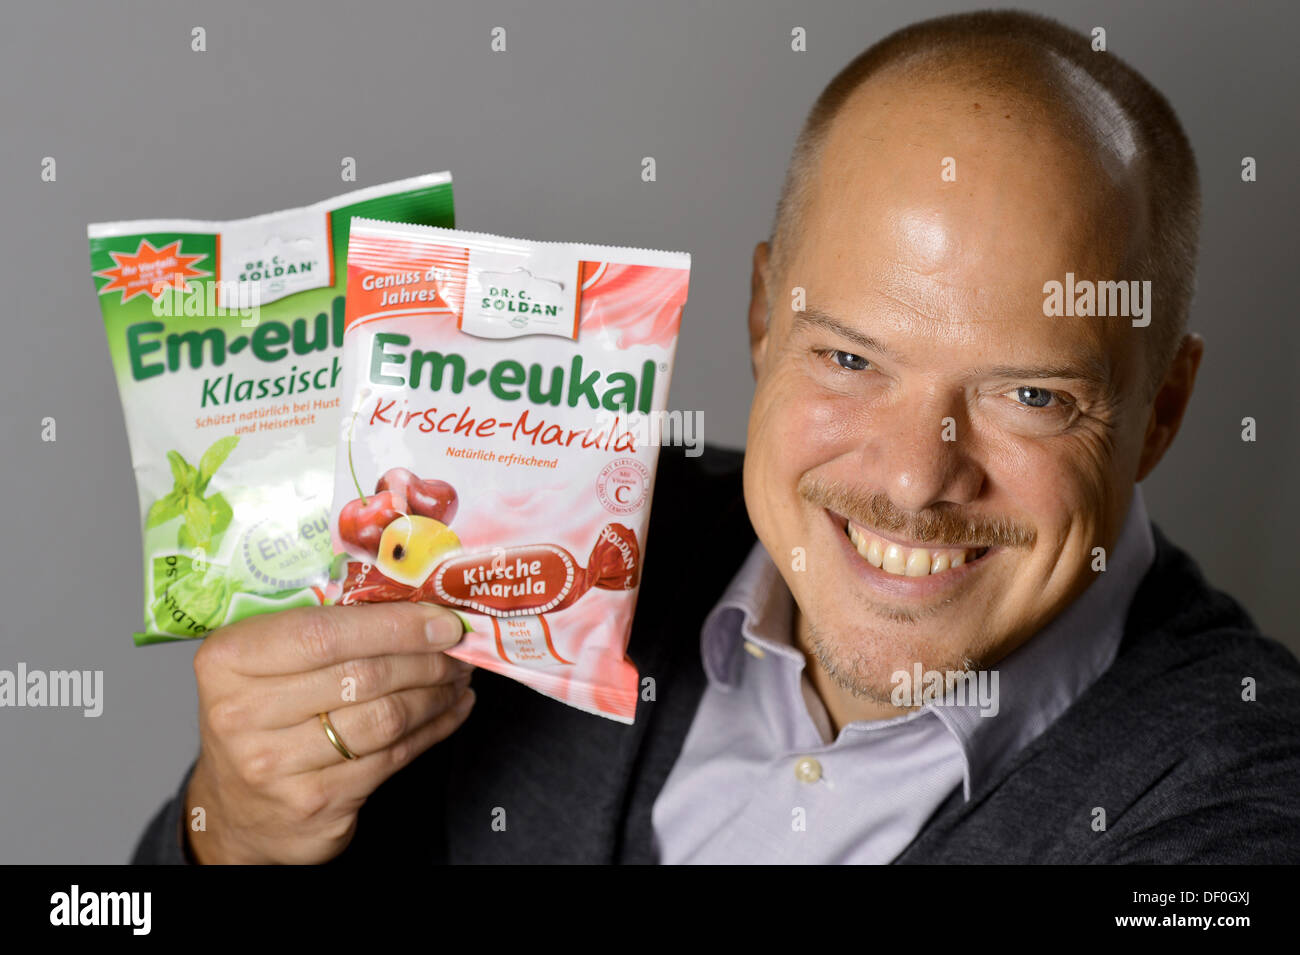 Perry Soldan (R), manager of the 'Dr.C.Soldan' confectionary company, shows different products of the 'Em-eukal' brand in Adlersdorf, Germany, 19 September 2013. The Company produces candy since 1899. Photo: David Ebener/dpa Stock Photo